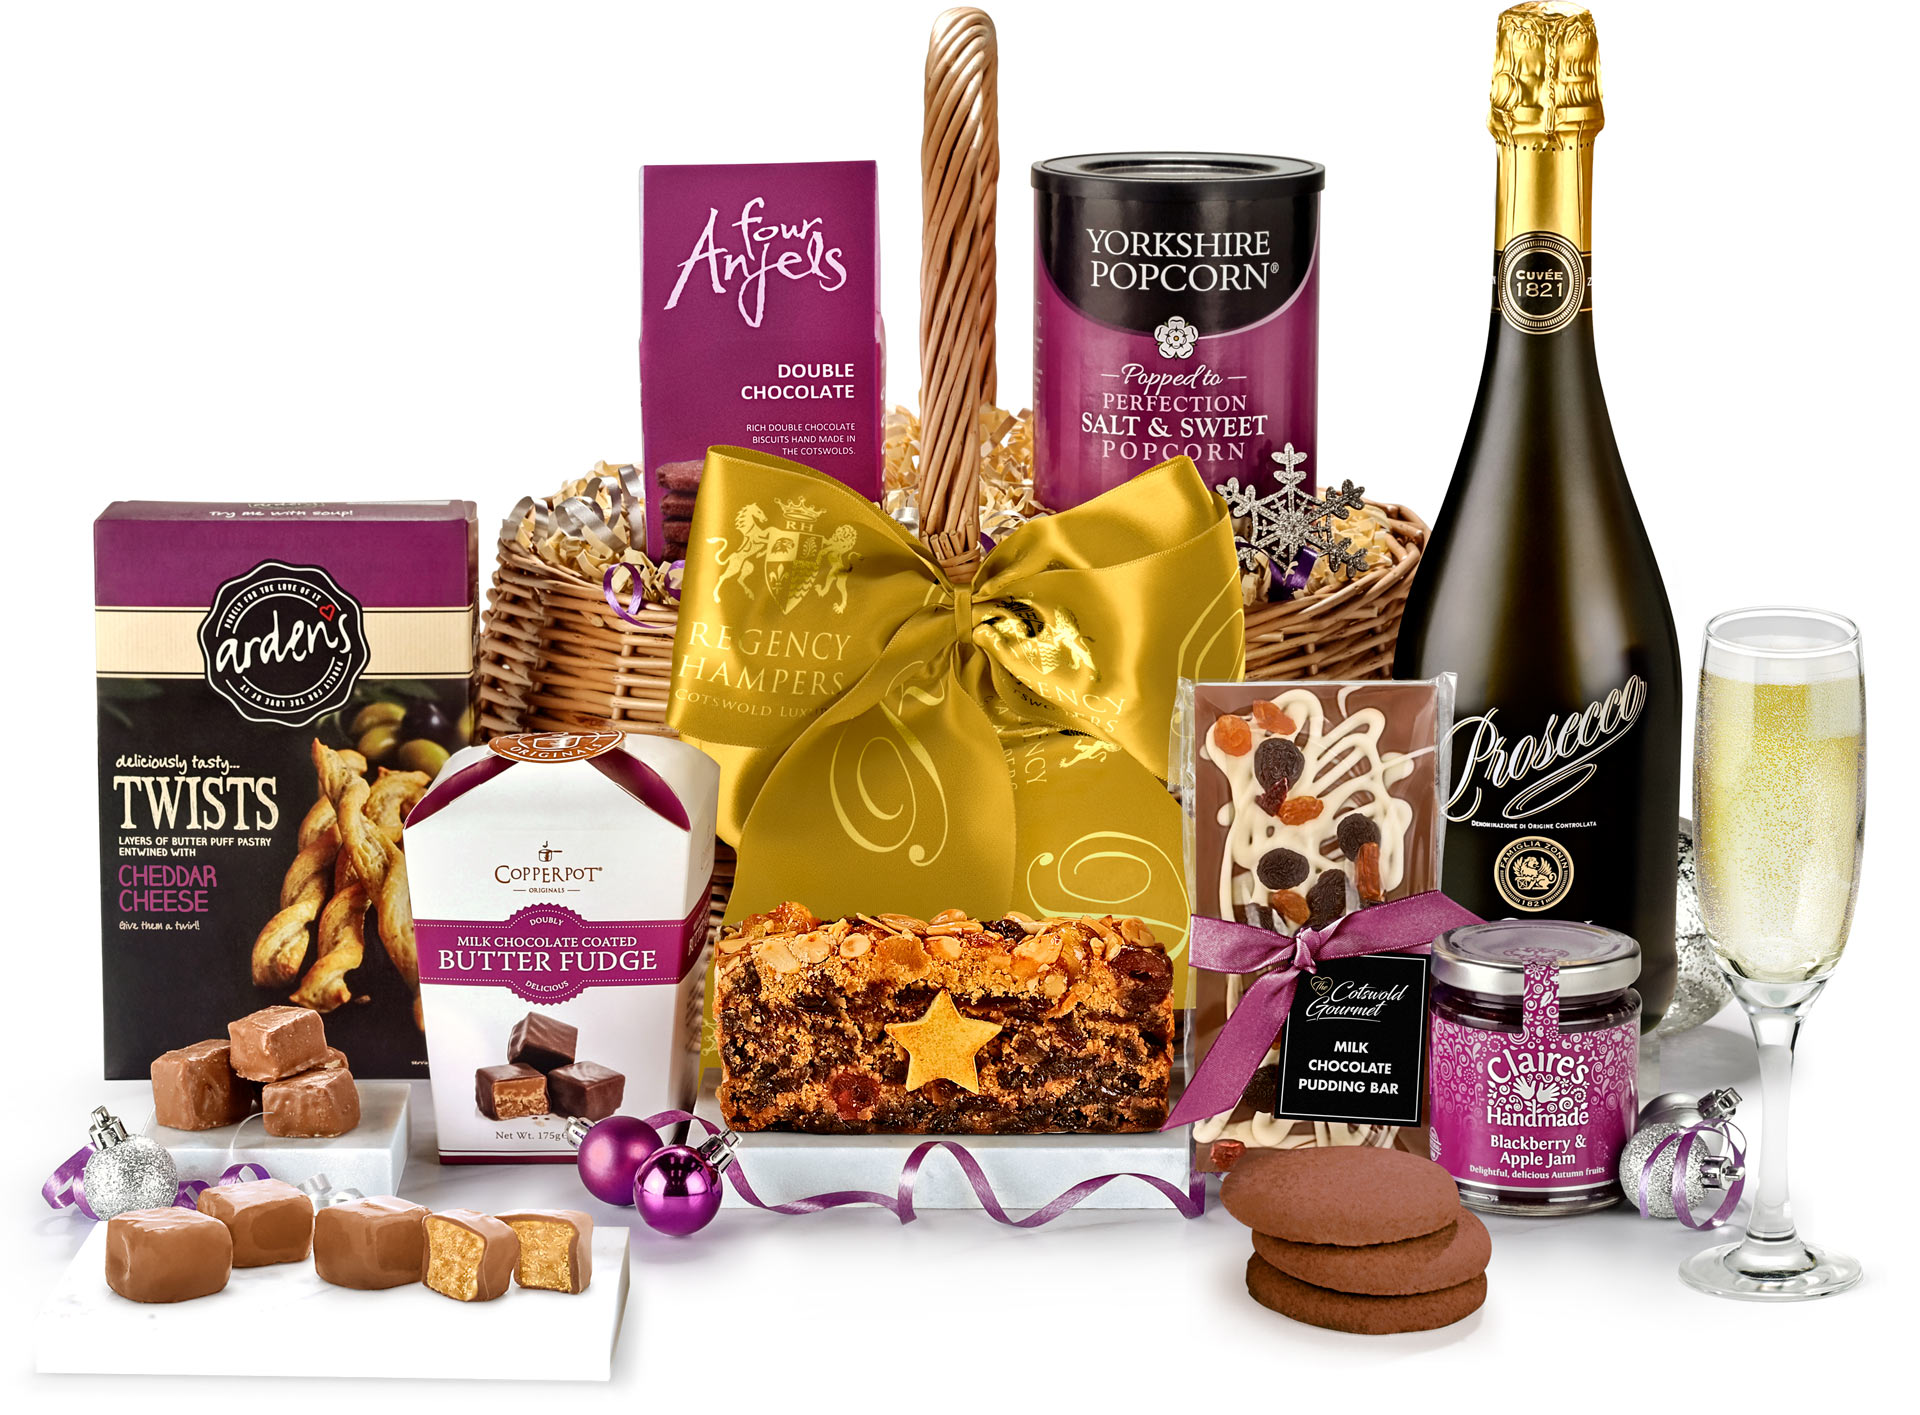 Explore hampers for mum this Christmas